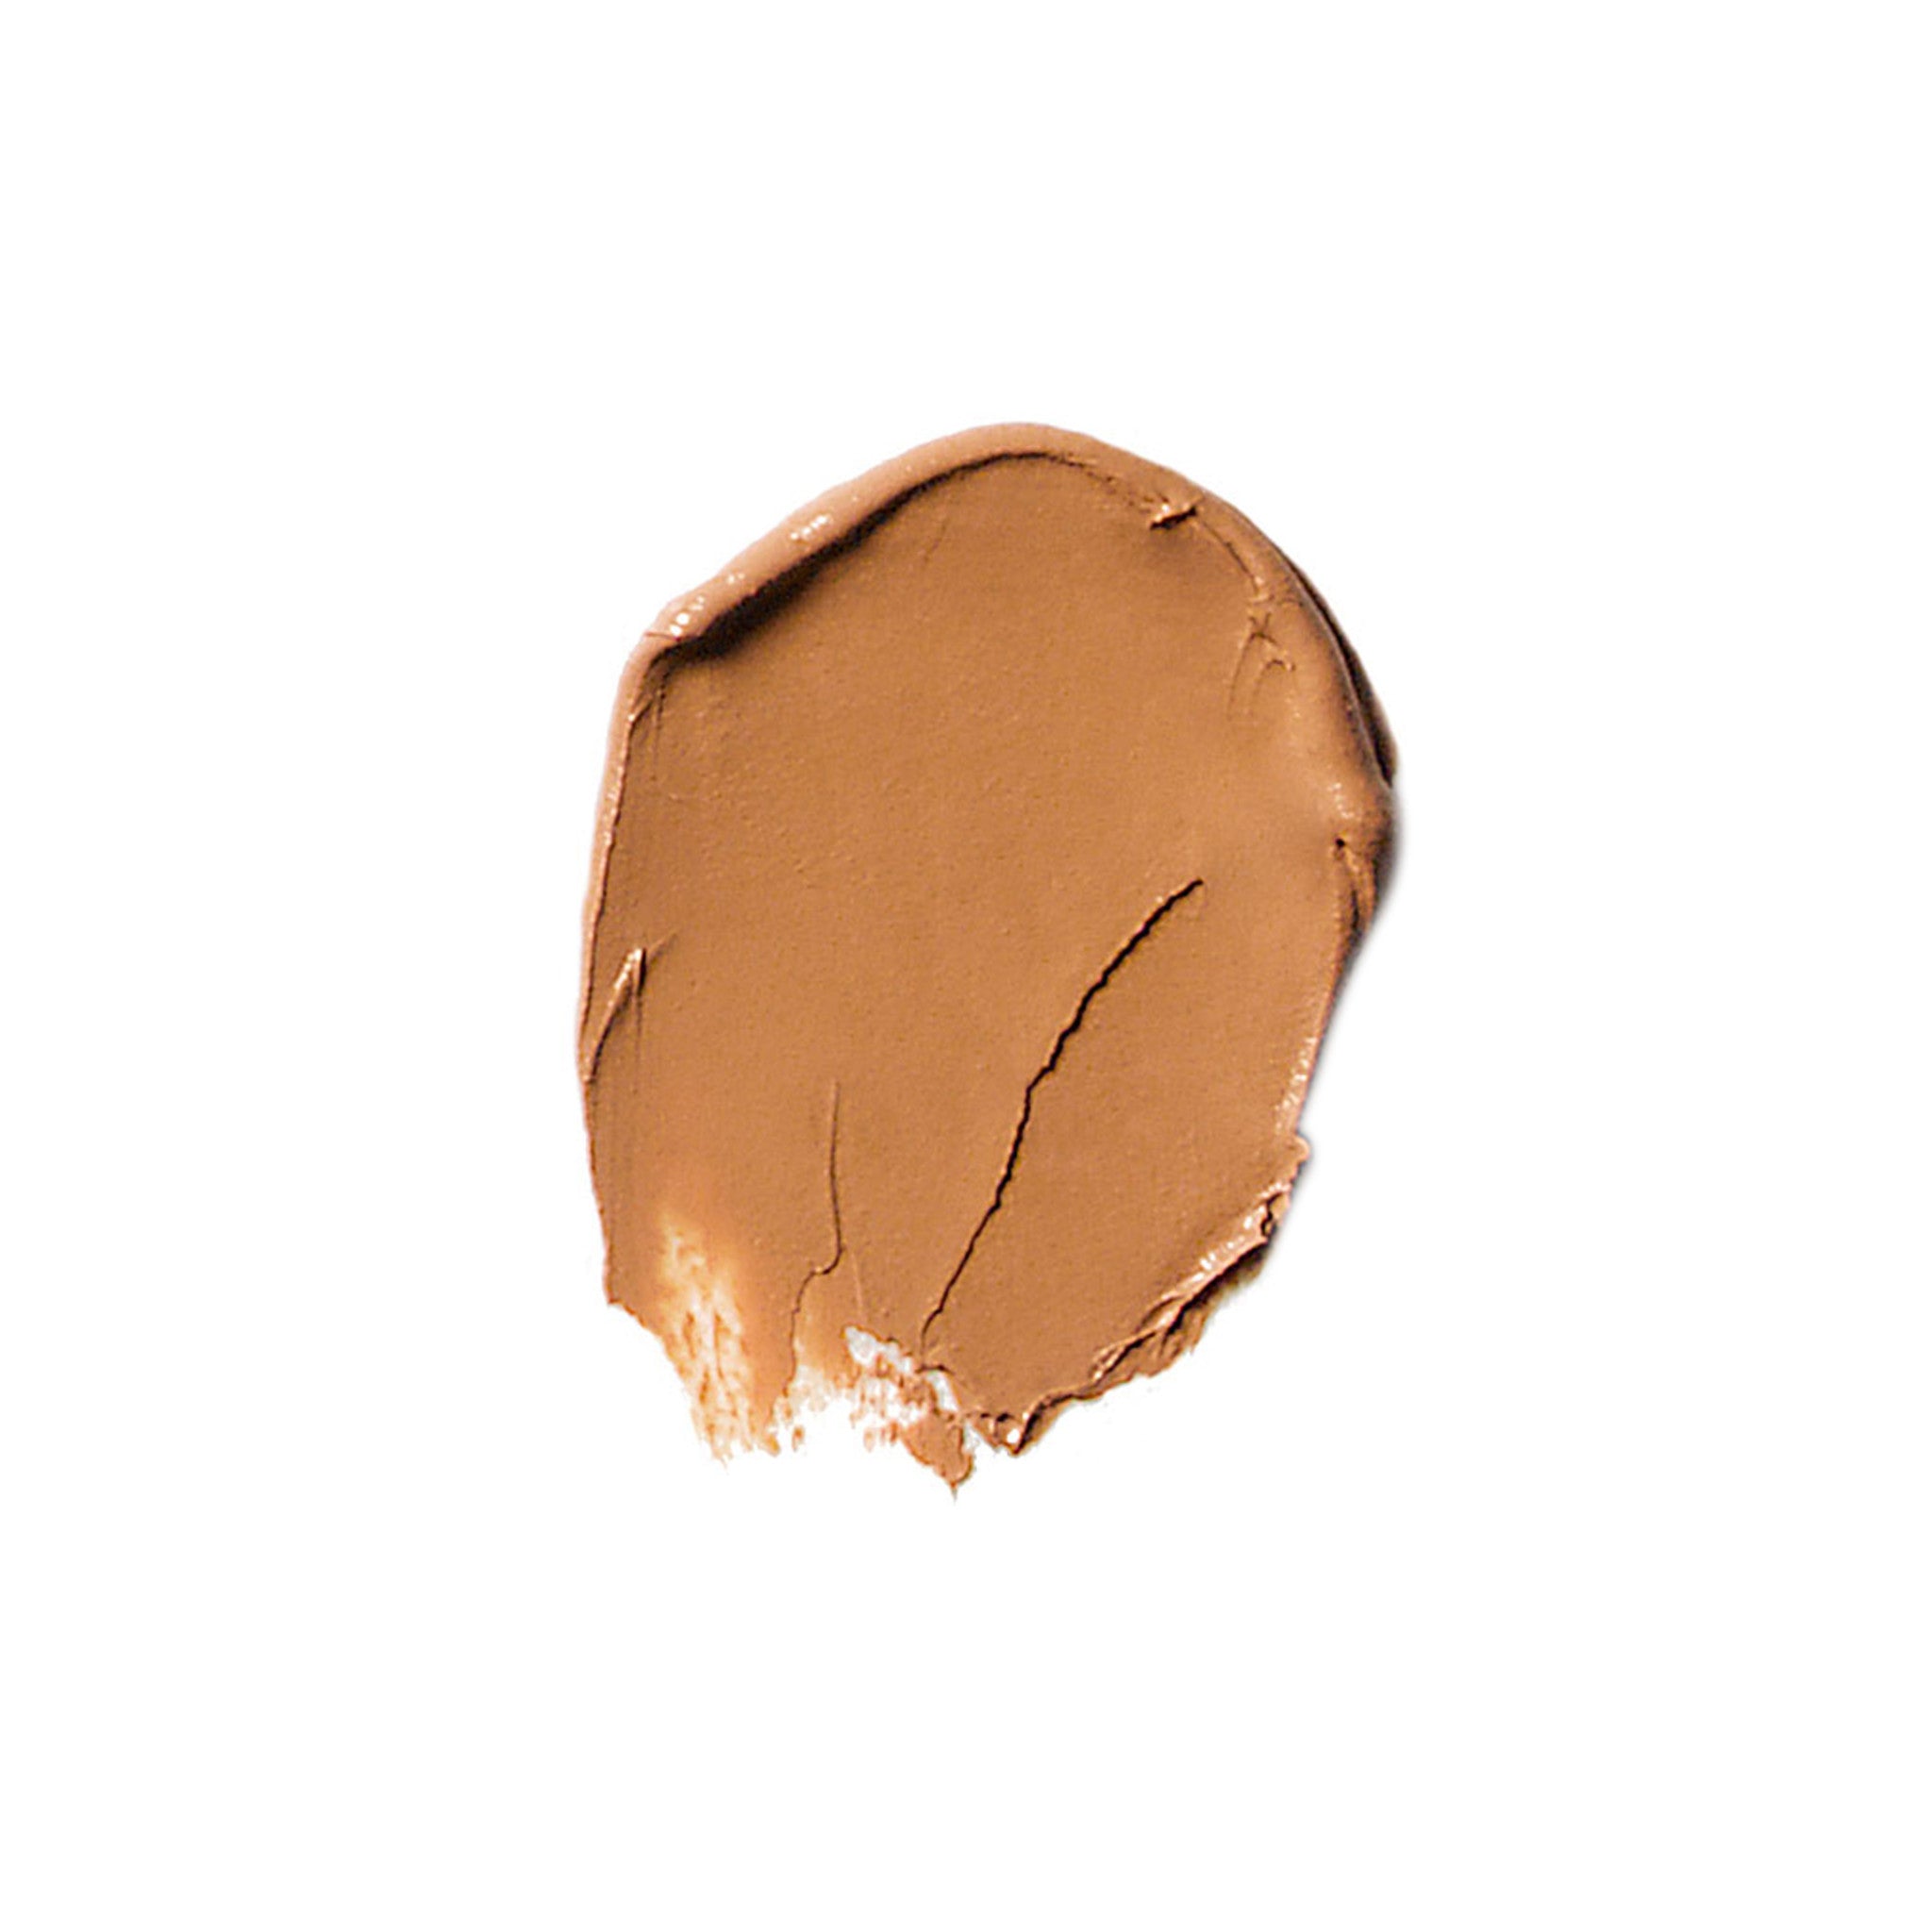 Bobbi Brown Creamy Concealer Kit Color/Shade variant: Warm Honey main image. This product is in the color nude, for medium warm golden complexions